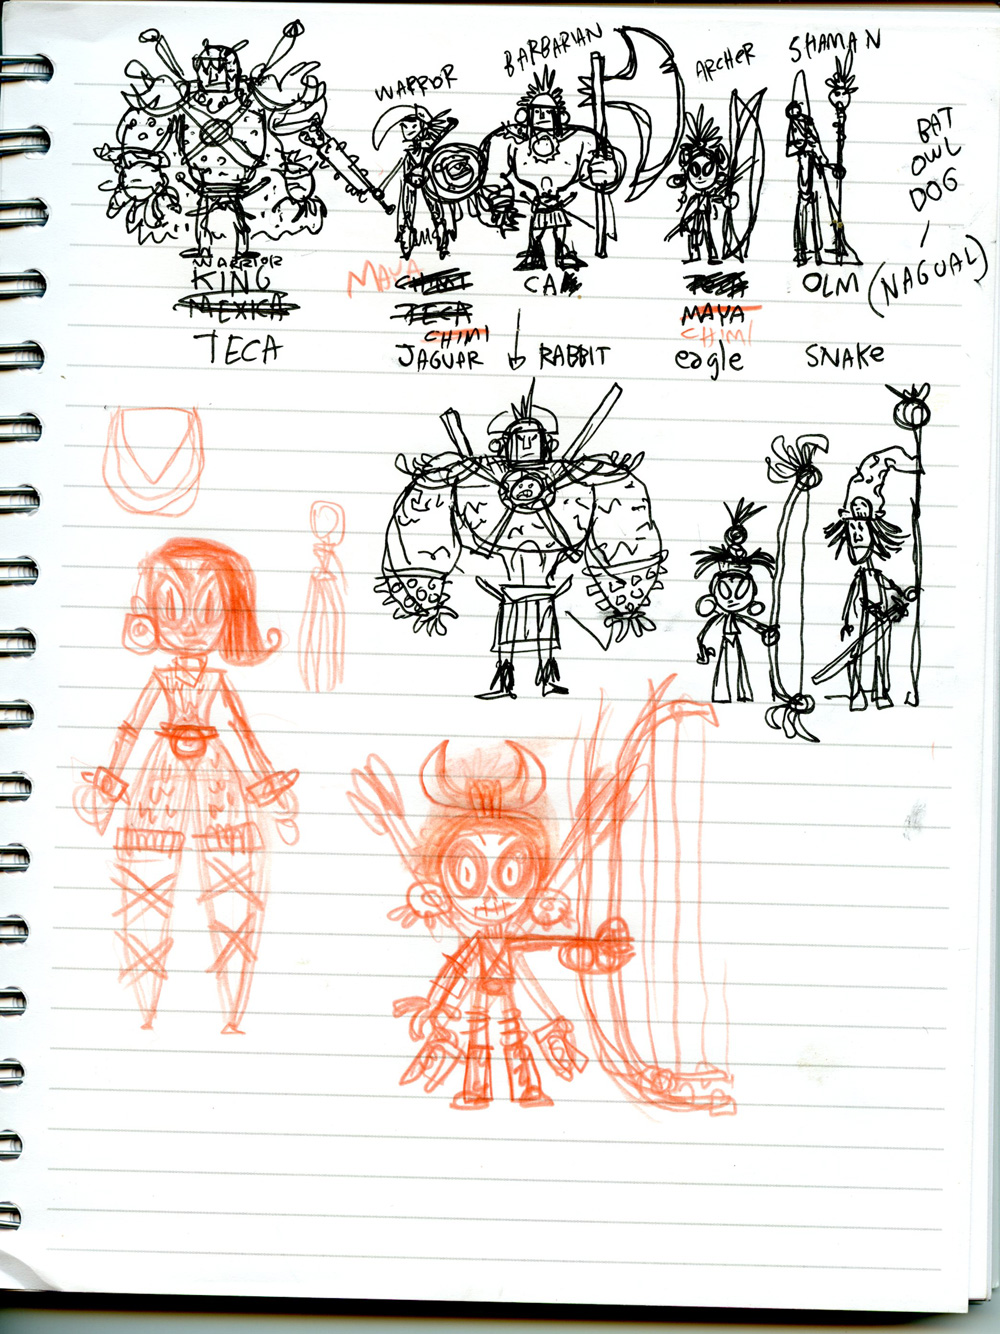 A page from Jorge Gutiérrez's sketchbook, showing character concepts for Maya and the Three.